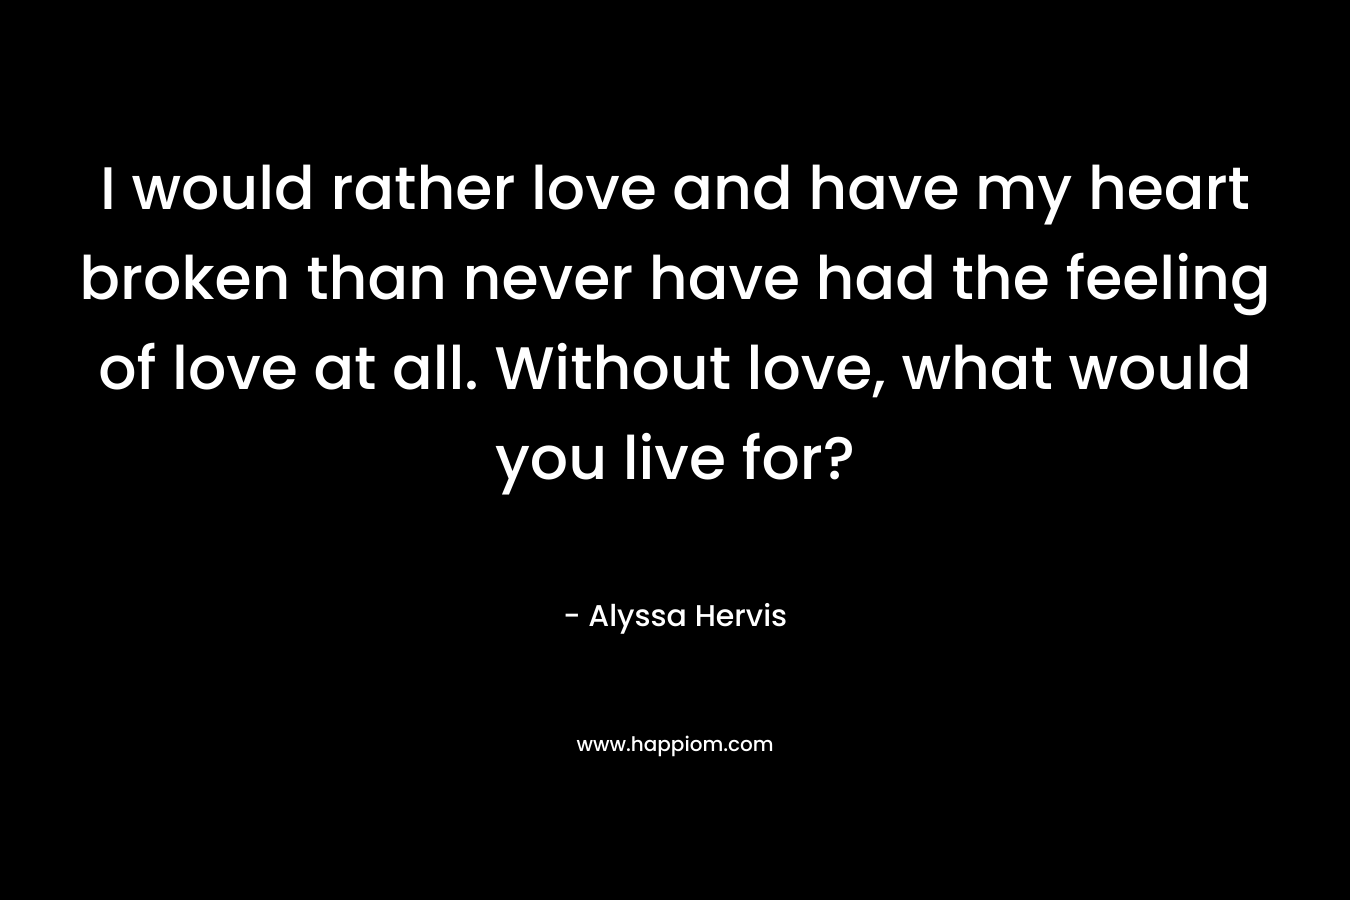 I would rather love and have my heart broken than never have had the feeling of love at all. Without love, what would you live for? – Alyssa Hervis